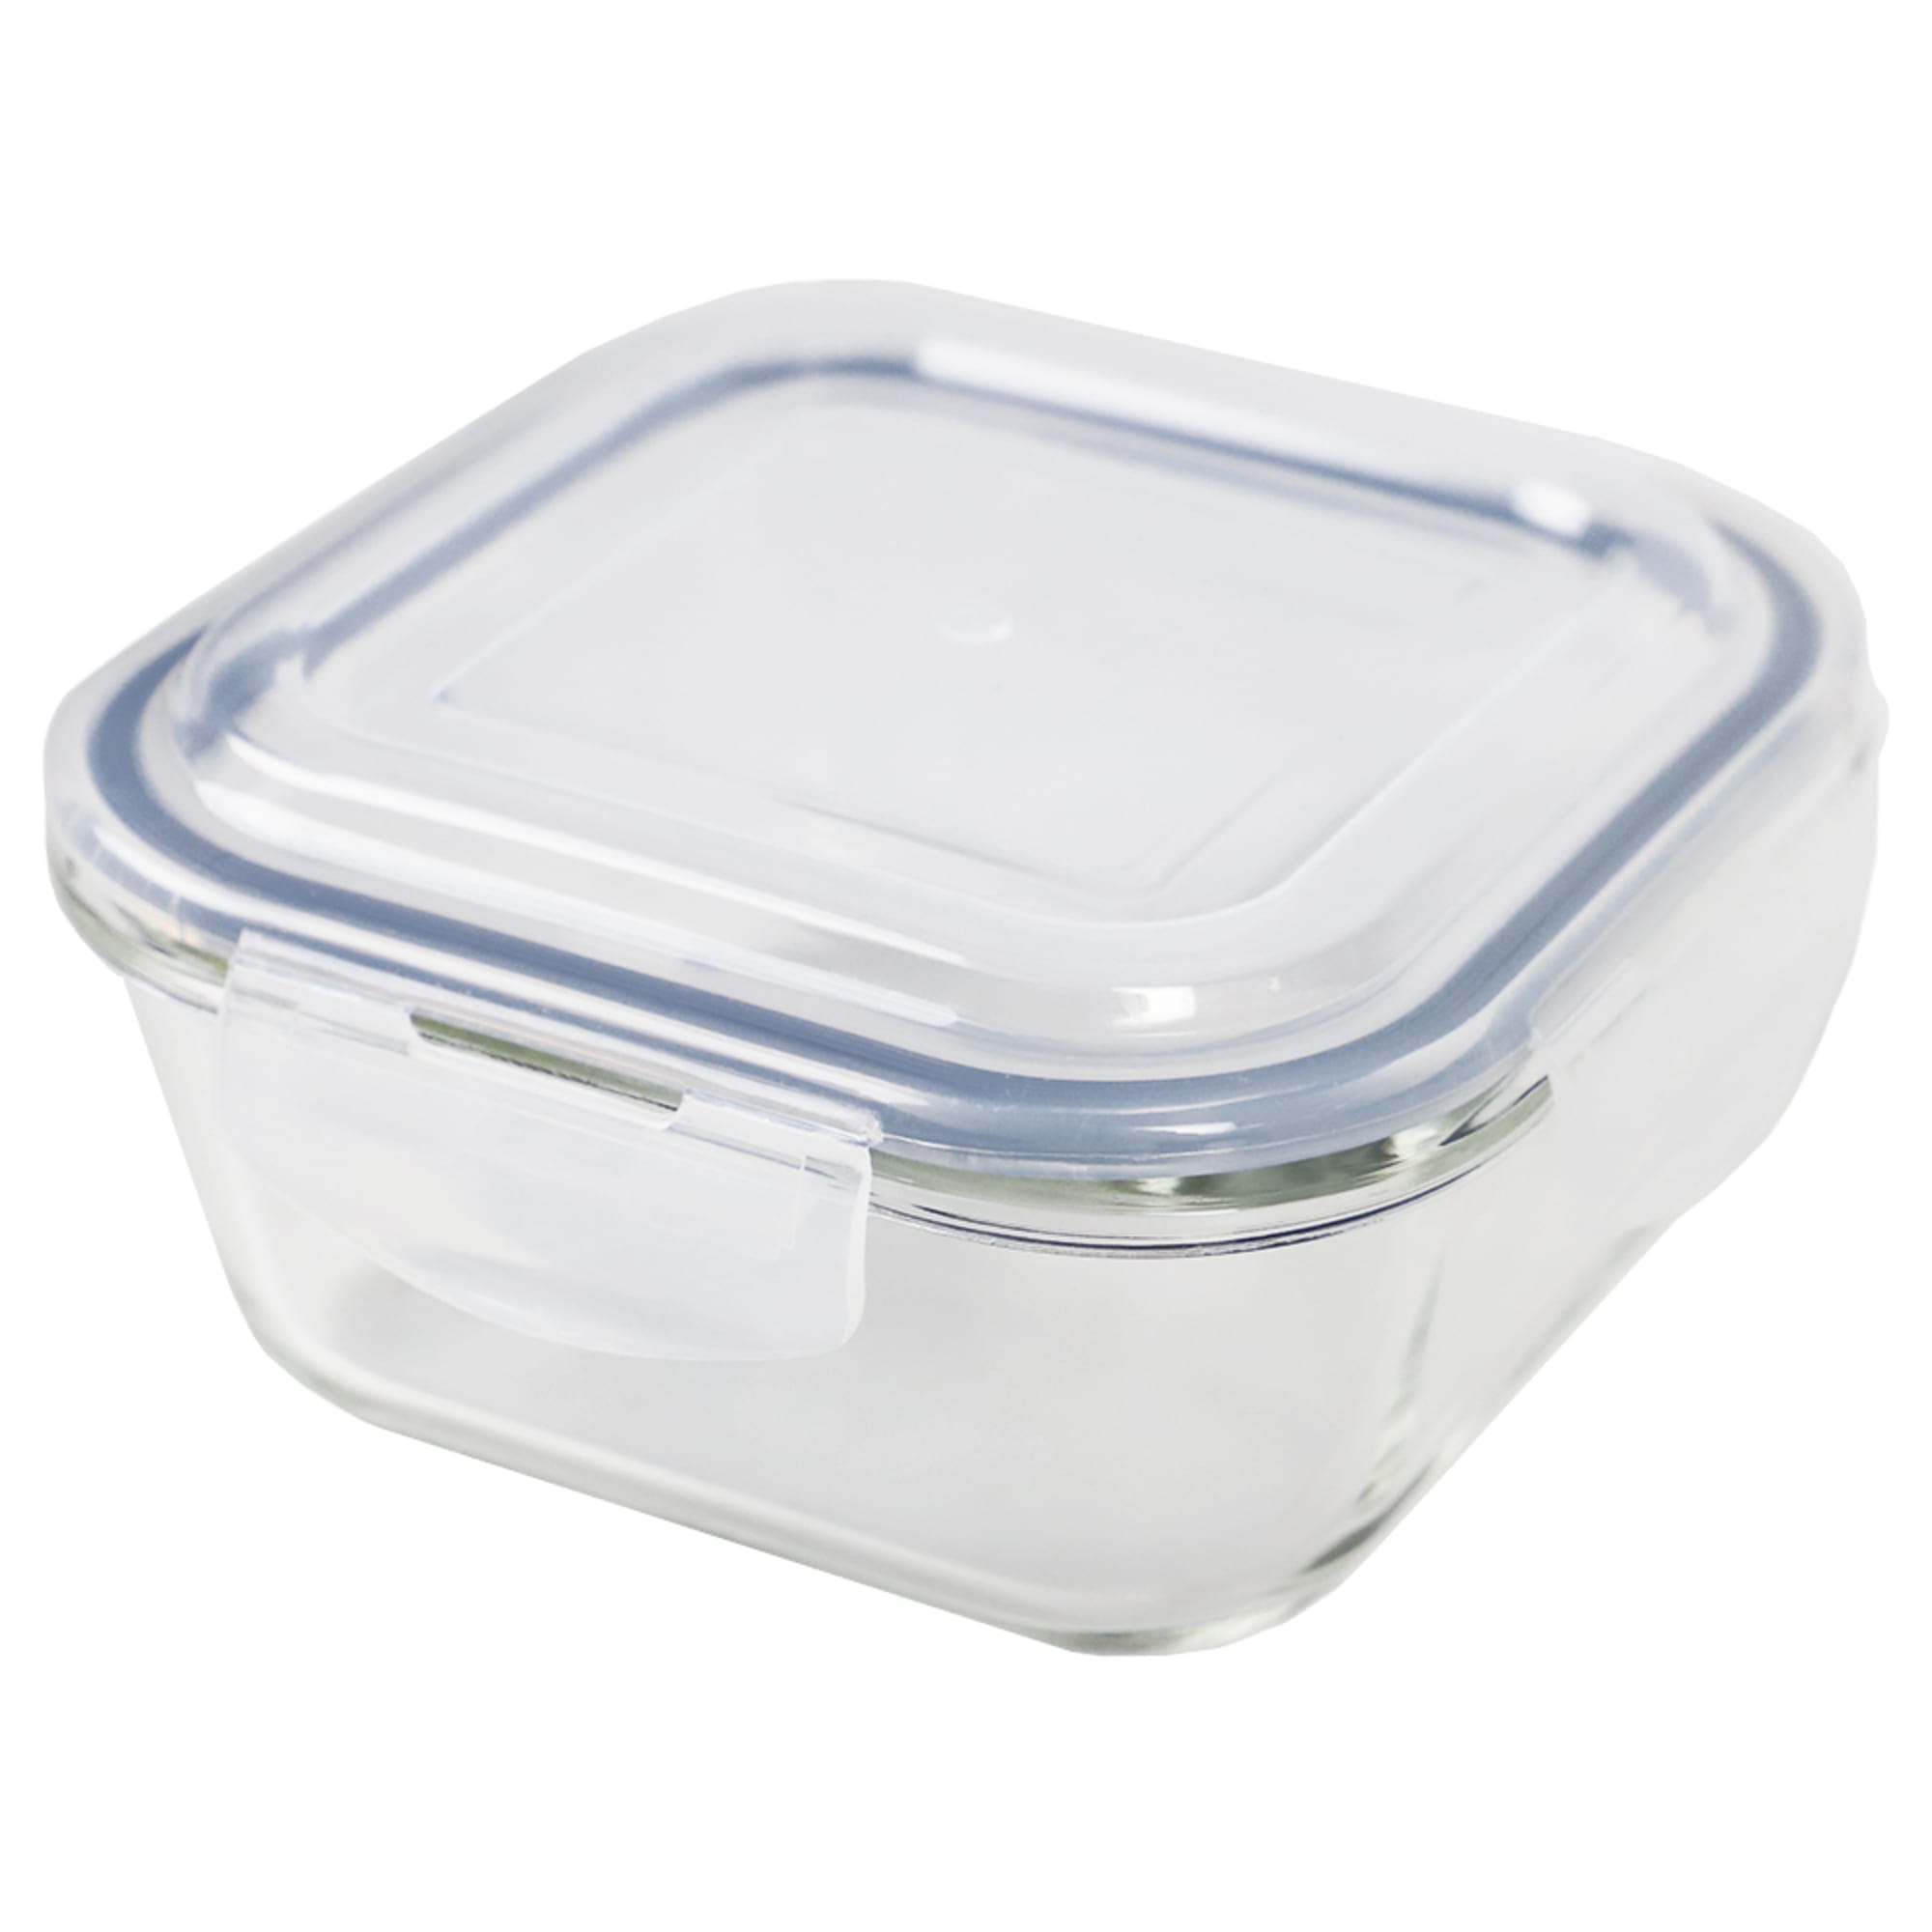 Michael Graves Design 27 Ounce High Borosilicate Glass Square Food Storage Container with Indigo Rubber Seal $5.00 EACH, CASE PACK OF 12